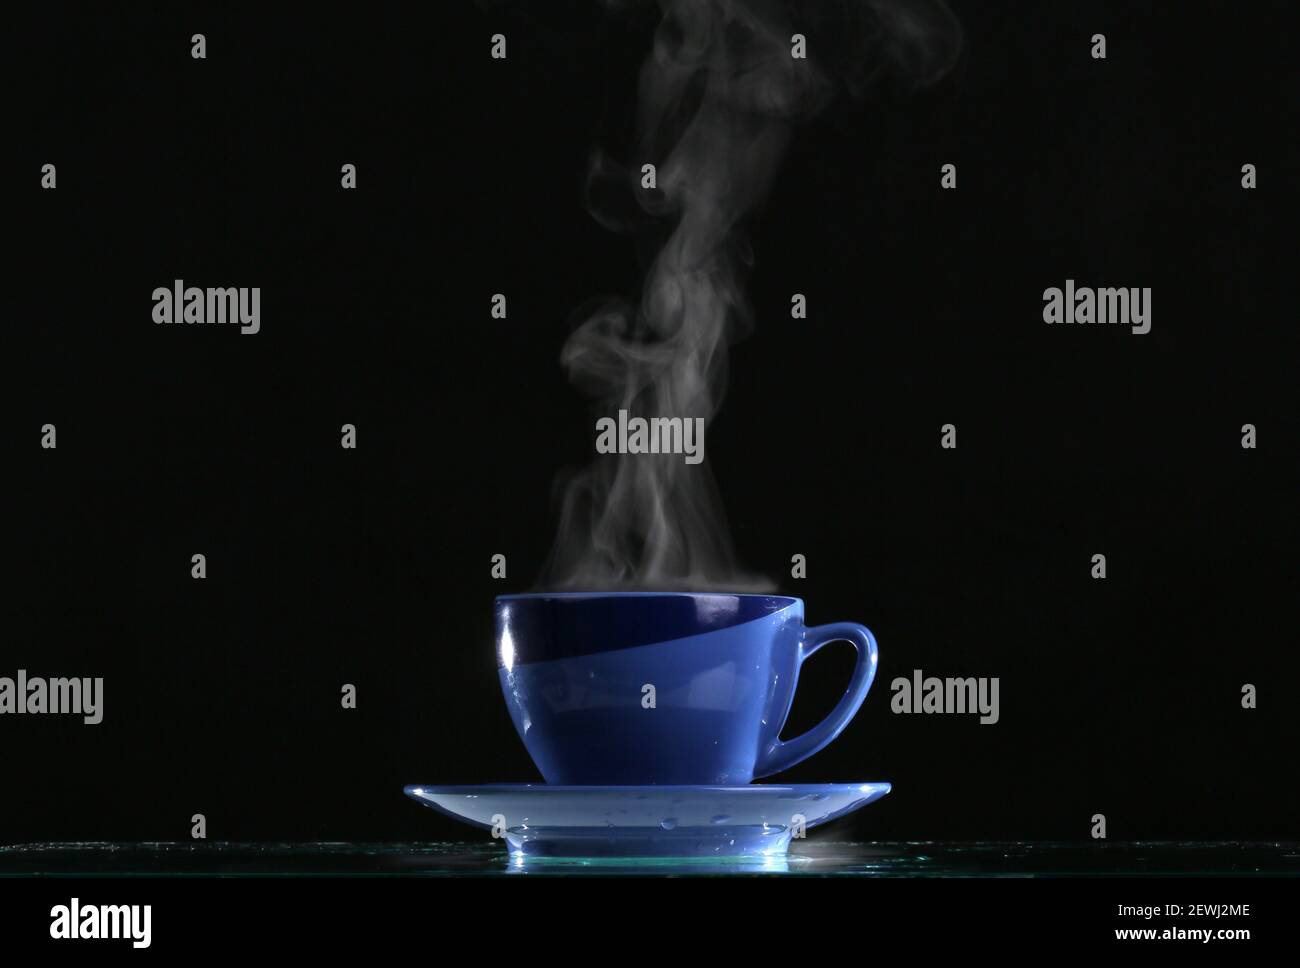 Pouring hot water into into a cup on a black background, Stock image